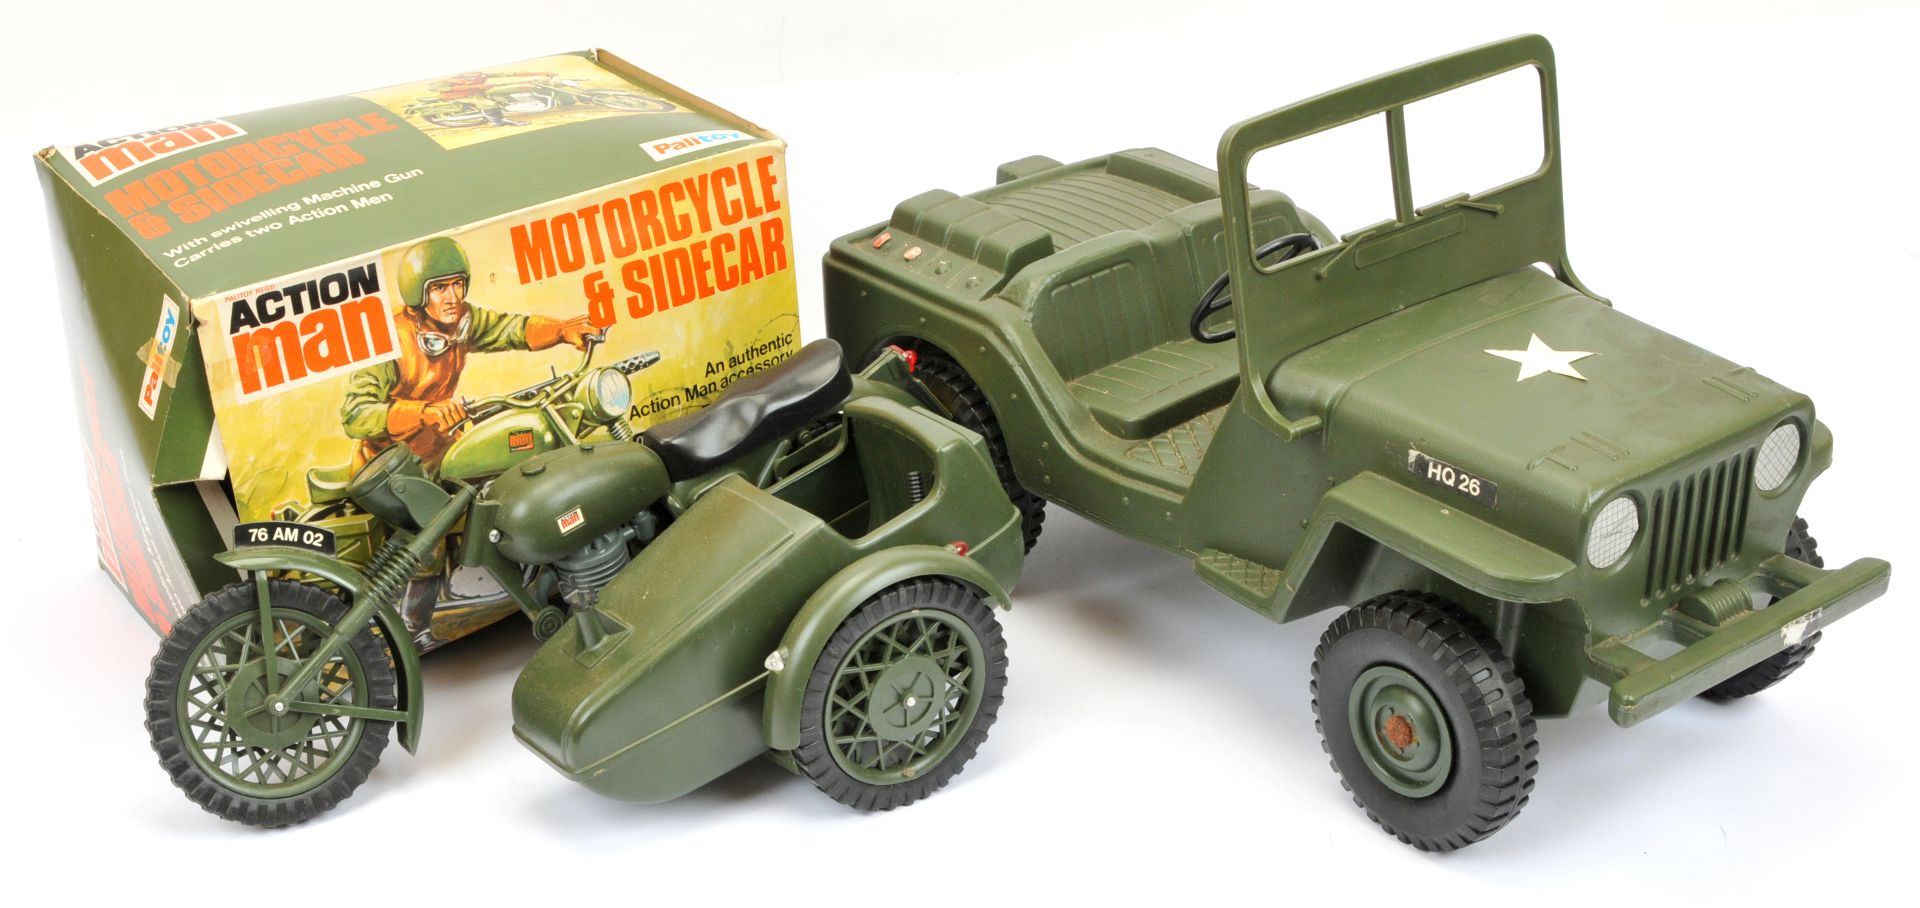 Action Man and similar 1/6th scale vehicle pair (1) Hasbro US Army Jeep - unboxed; (2) boxed Pali...